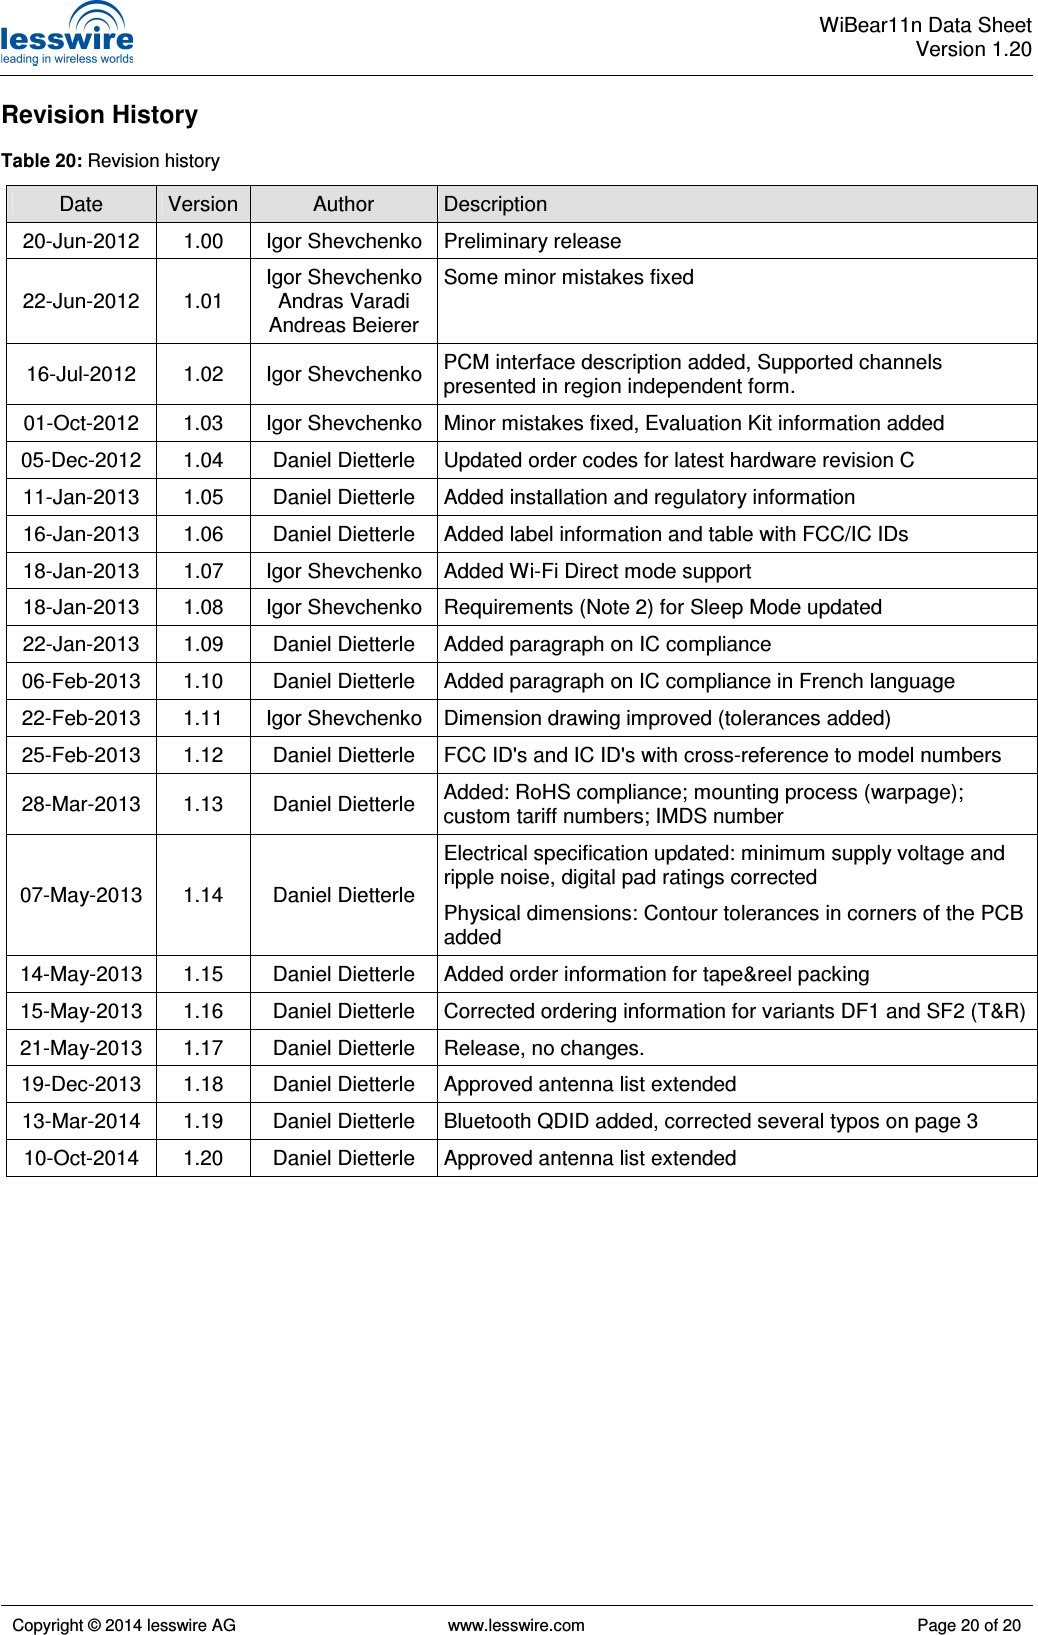  WiBear11n Data SheetVersion 1.20   Copyright © 2014 lesswire AG   www.lesswire.com  Page 20 of 20  Revision History  Table 20: Revision history Date  Version Author  Description 20-Jun-2012  1.00  Igor Shevchenko  Preliminary release 22-Jun-2012  1.01 Igor Shevchenko Andras Varadi Andreas Beierer Some minor mistakes fixed 16-Jul-2012  1.02  Igor Shevchenko  PCM interface description added, Supported channels presented in region independent form.  01-Oct-2012  1.03  Igor Shevchenko  Minor mistakes fixed, Evaluation Kit information added 05-Dec-2012  1.04  Daniel Dietterle  Updated order codes for latest hardware revision C 11-Jan-2013  1.05  Daniel Dietterle  Added installation and regulatory information 16-Jan-2013  1.06  Daniel Dietterle  Added label information and table with FCC/IC IDs 18-Jan-2013  1.07  Igor Shevchenko  Added Wi-Fi Direct mode support 18-Jan-2013  1.08  Igor Shevchenko  Requirements (Note 2) for Sleep Mode updated 22-Jan-2013  1.09  Daniel Dietterle  Added paragraph on IC compliance 06-Feb-2013  1.10  Daniel Dietterle  Added paragraph on IC compliance in French language 22-Feb-2013  1.11  Igor Shevchenko  Dimension drawing improved (tolerances added) 25-Feb-2013  1.12  Daniel Dietterle  FCC ID&apos;s and IC ID&apos;s with cross-reference to model numbers 28-Mar-2013  1.13  Daniel Dietterle  Added: RoHS compliance; mounting process (warpage); custom tariff numbers; IMDS number 07-May-2013  1.14  Daniel Dietterle Electrical specification updated: minimum supply voltage and ripple noise, digital pad ratings corrected Physical dimensions: Contour tolerances in corners of the PCB added 14-May-2013  1.15  Daniel Dietterle  Added order information for tape&amp;reel packing 15-May-2013  1.16  Daniel Dietterle  Corrected ordering information for variants DF1 and SF2 (T&amp;R) 21-May-2013  1.17  Daniel Dietterle  Release, no changes. 19-Dec-2013  1.18  Daniel Dietterle  Approved antenna list extended 13-Mar-2014  1.19  Daniel Dietterle  Bluetooth QDID added, corrected several typos on page 3 10-Oct-2014  1.20  Daniel Dietterle  Approved antenna list extended  